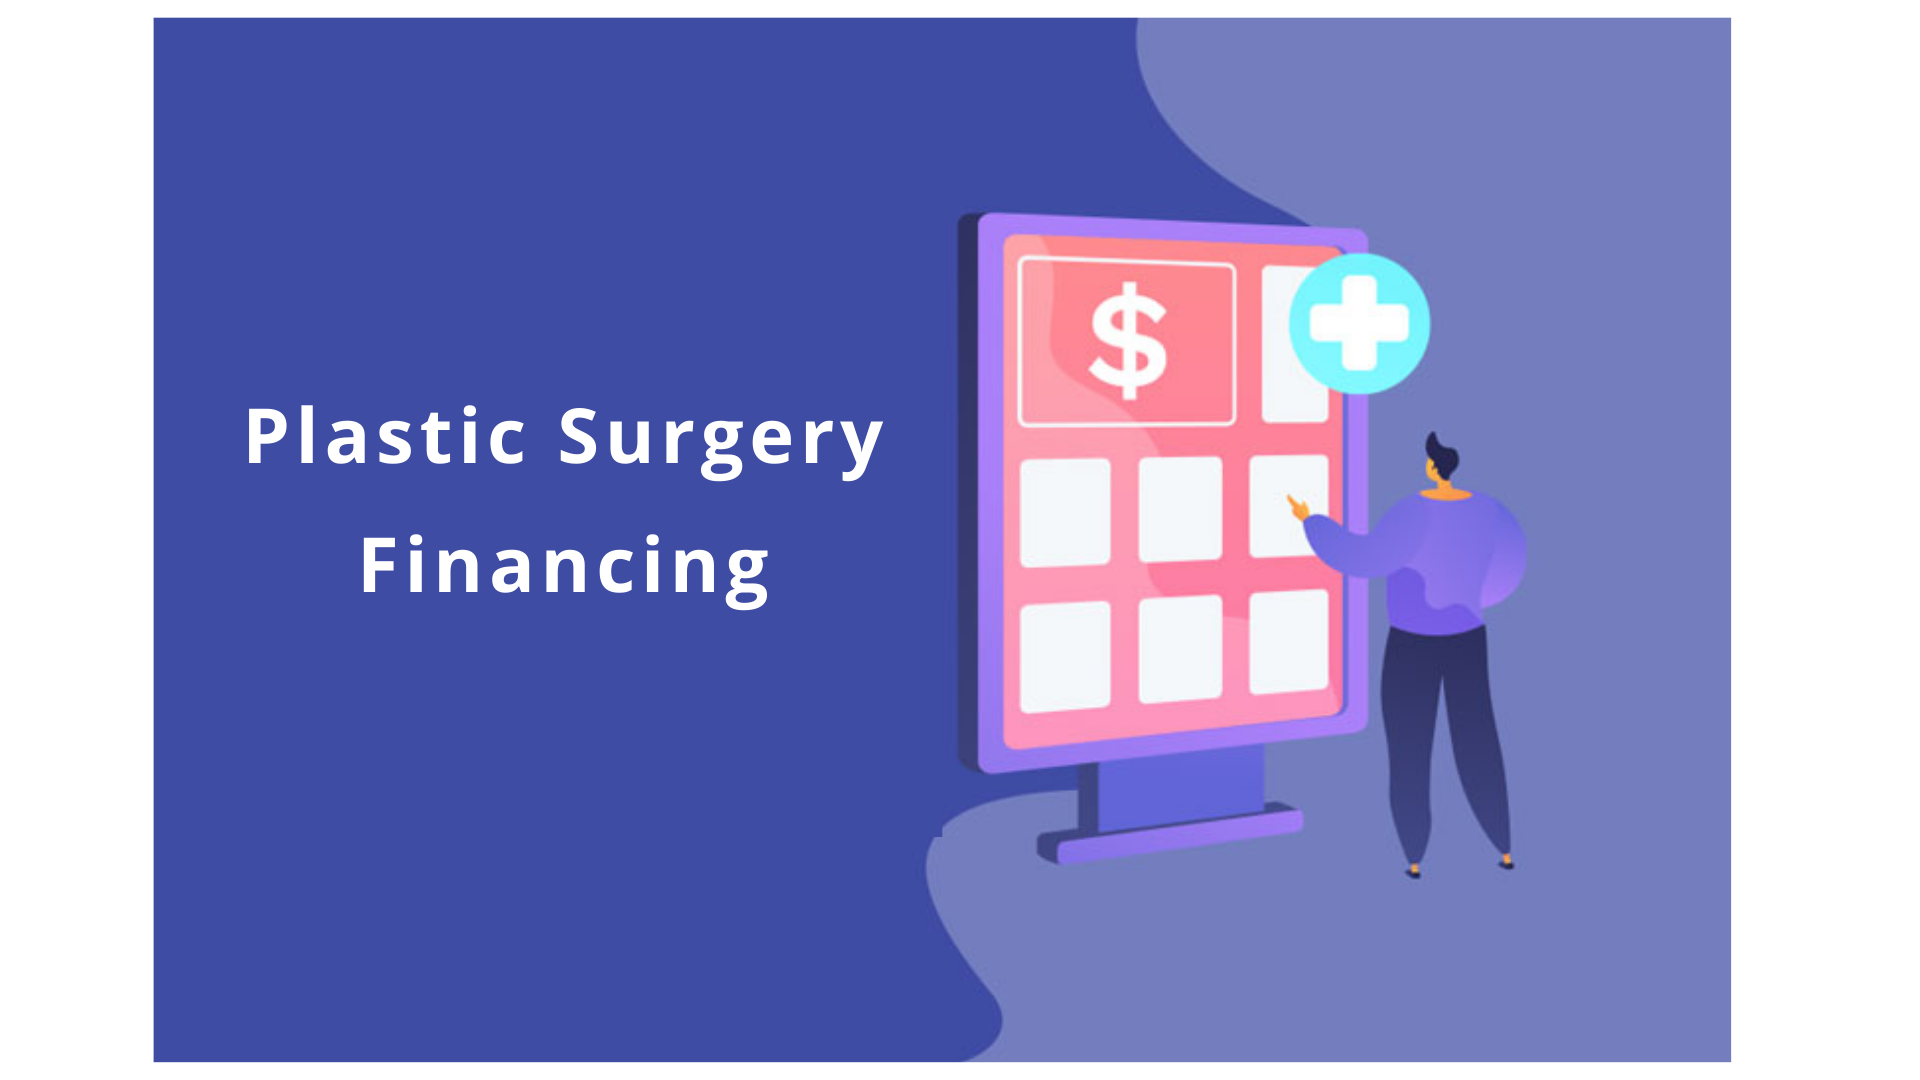 How to Offer Plastic Surgery Financing to Patients